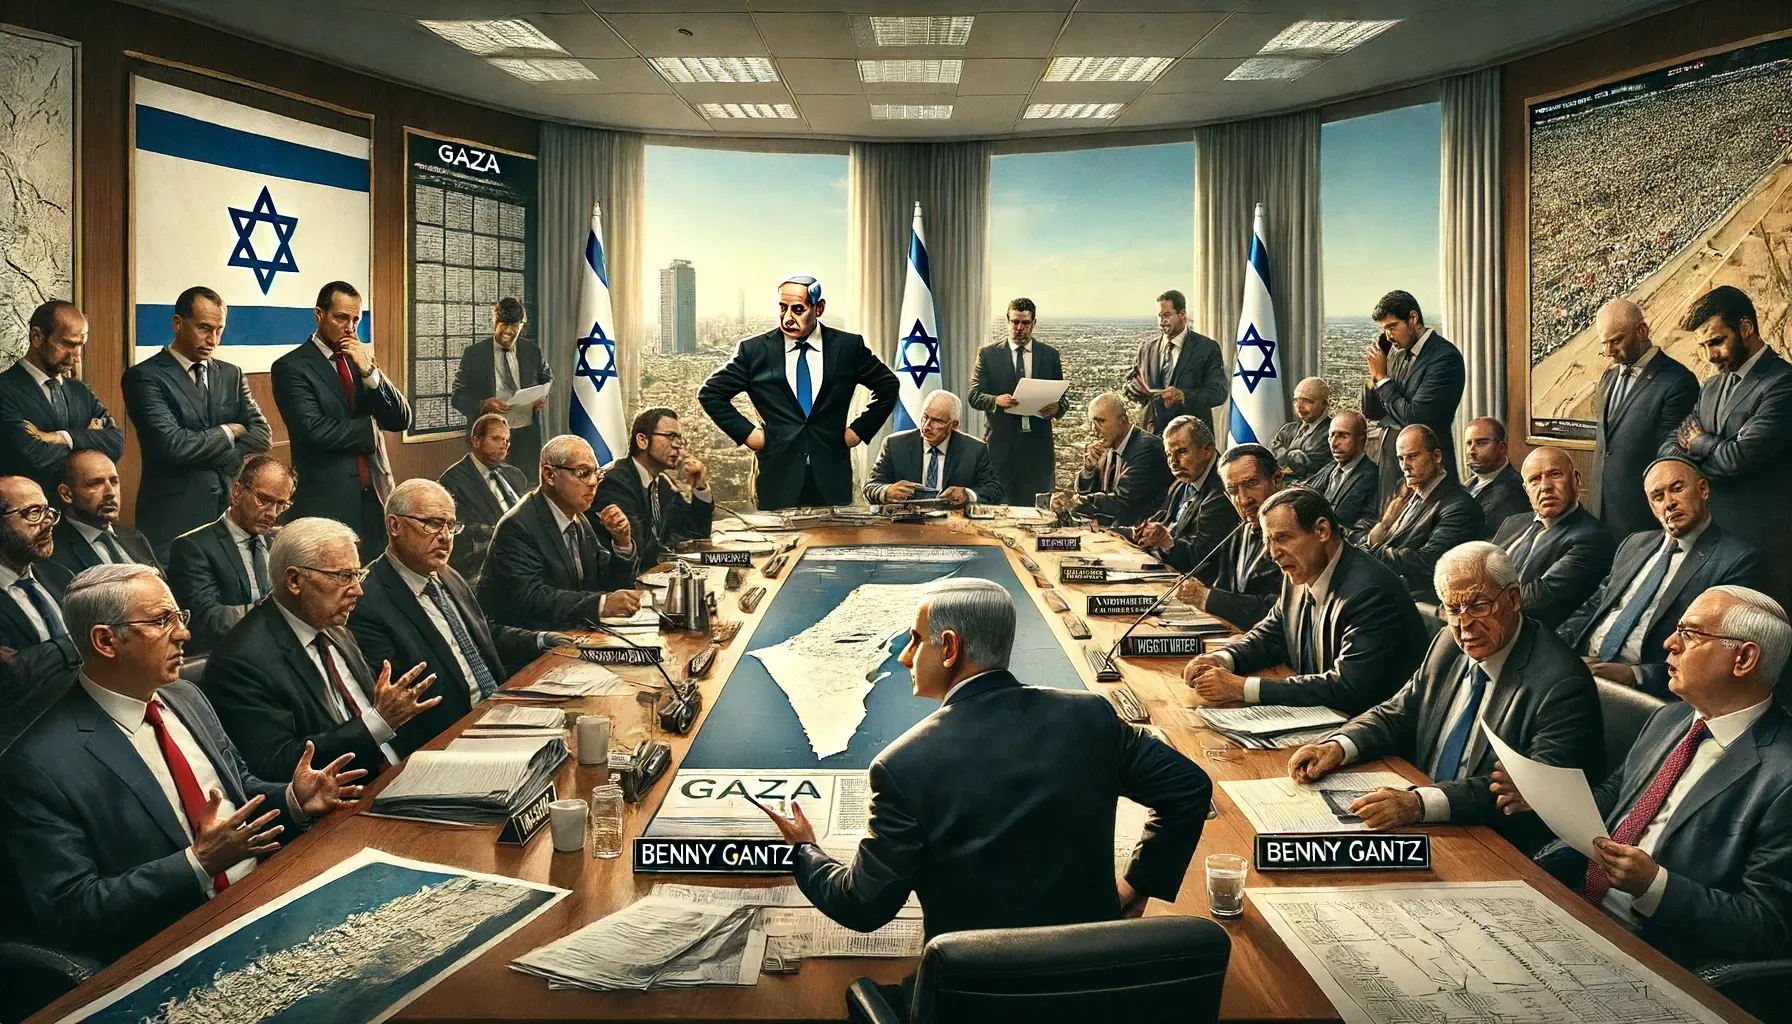 dalle 2024 06 17 120752 an intense political scene showing israeli prime minister benjamin netanyahu in a meeting room with a tense atmosphere netanyahu is seated at the hea